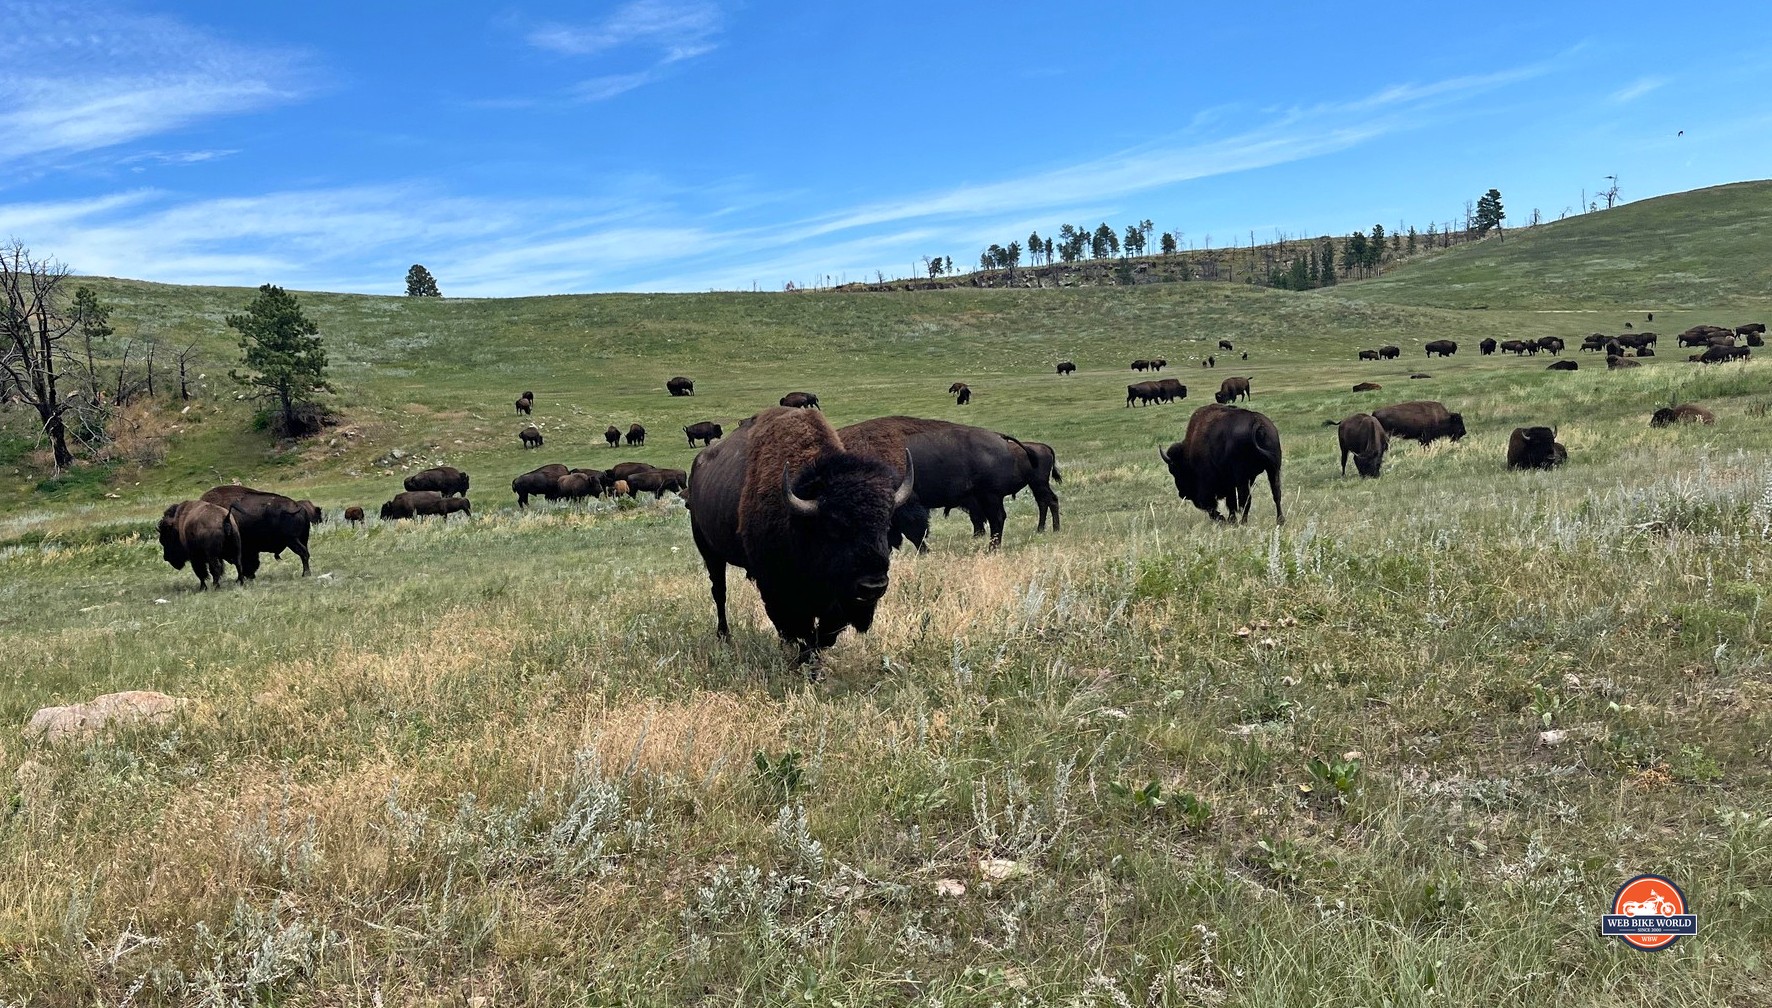 Bison! So many Bison in Custer State National Park